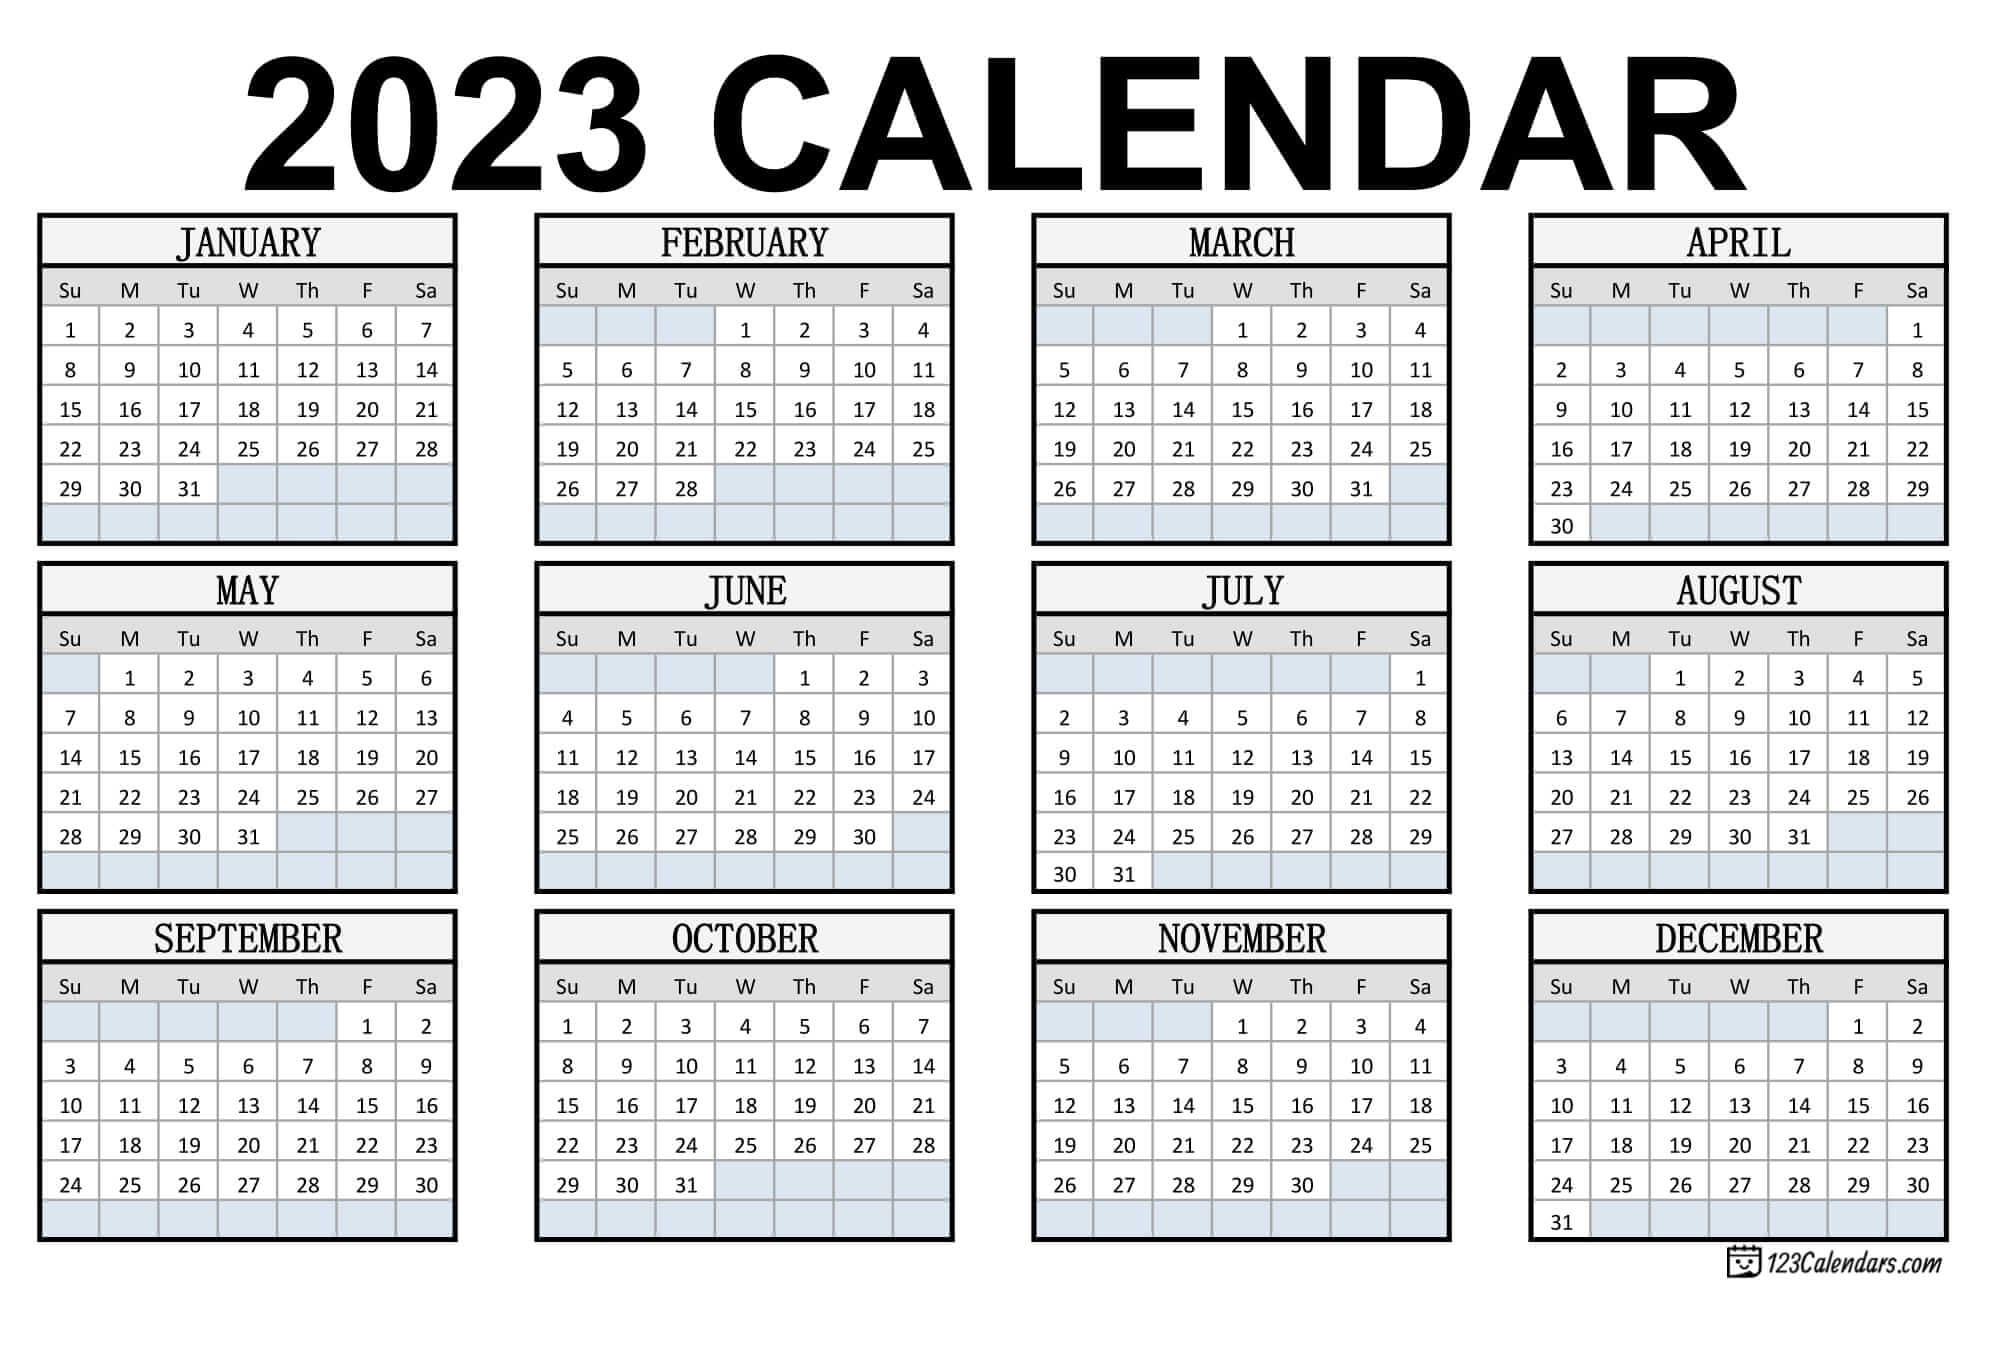 2023 calendar templates and images - 2023 calendar templates and images ...